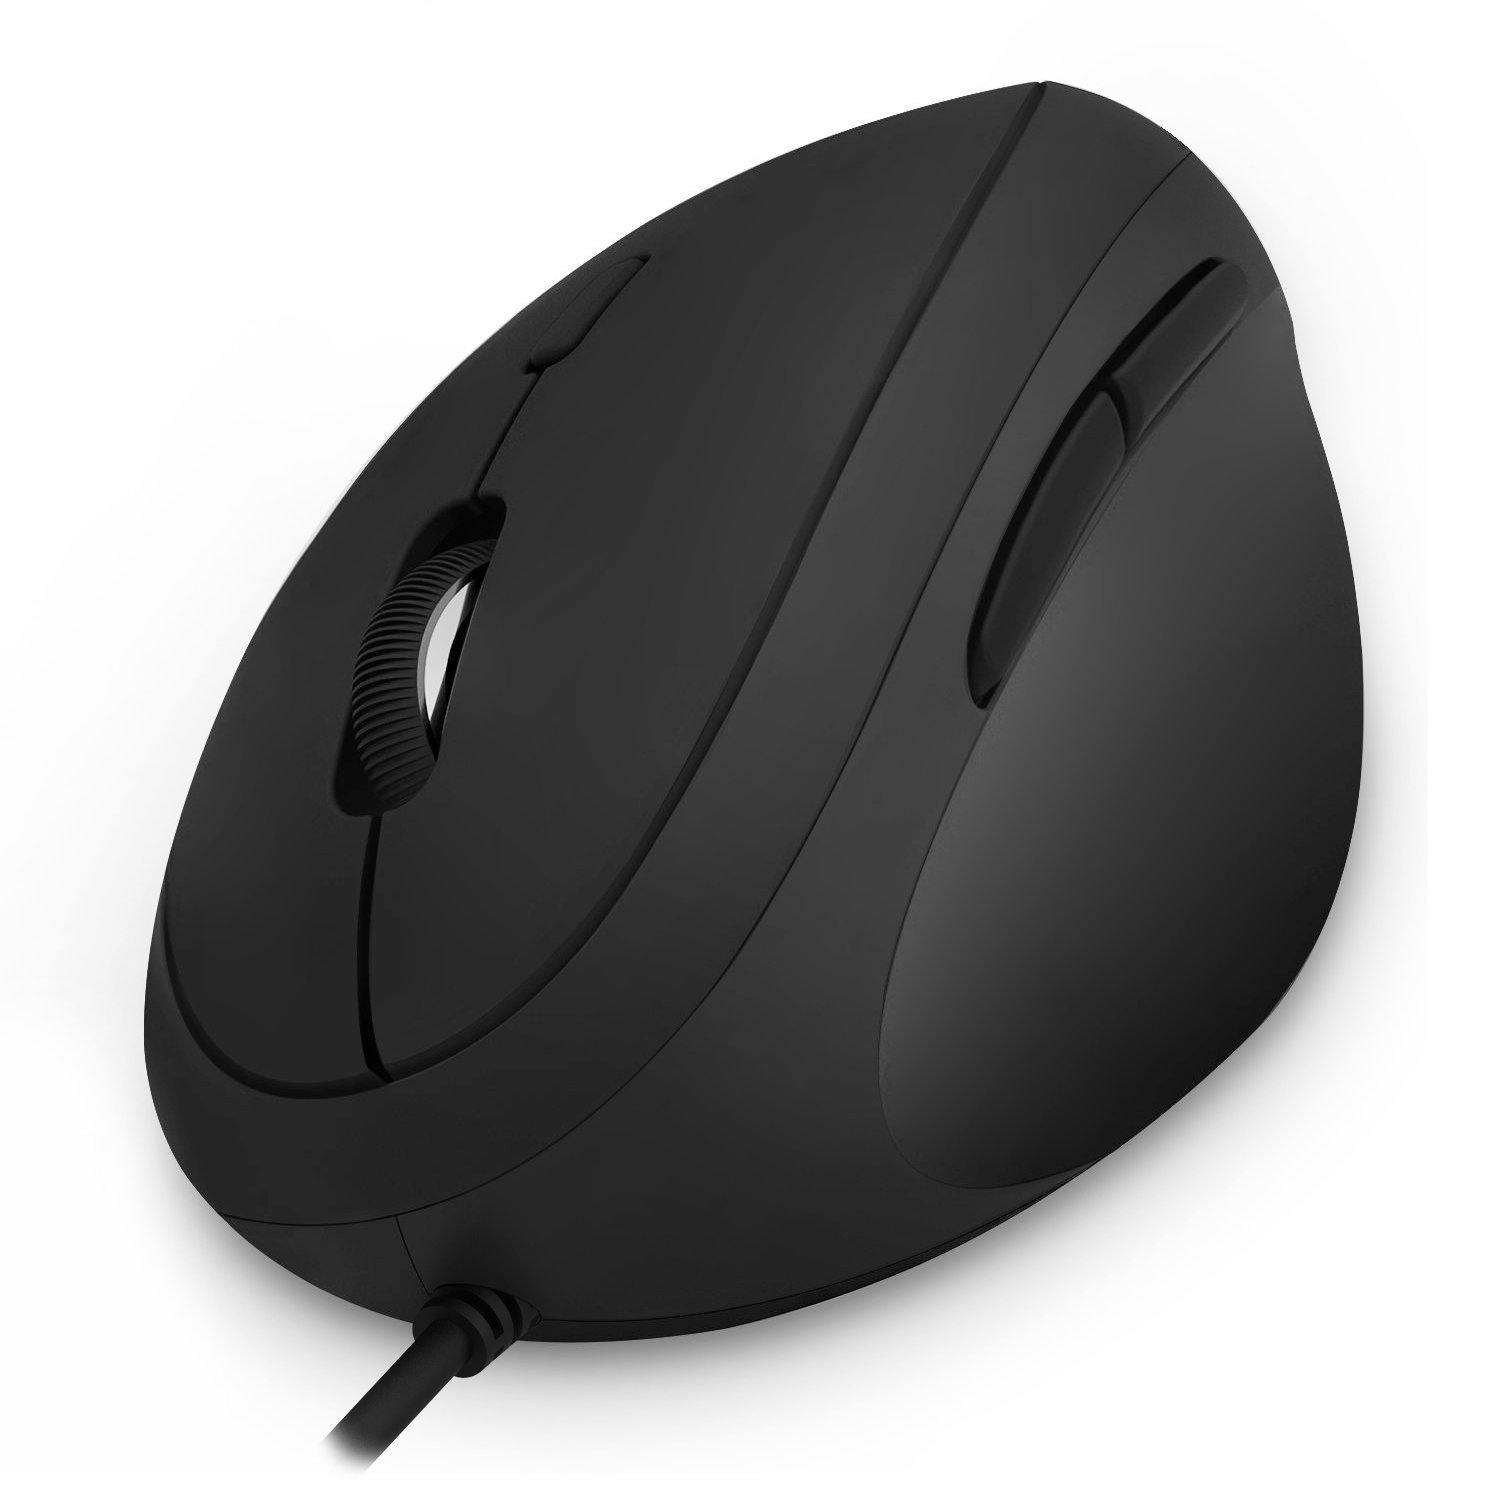 Ergonomic Wired Mouse, Jelly Comb 2.4G Silent Vertical Gaming Mouse Mo